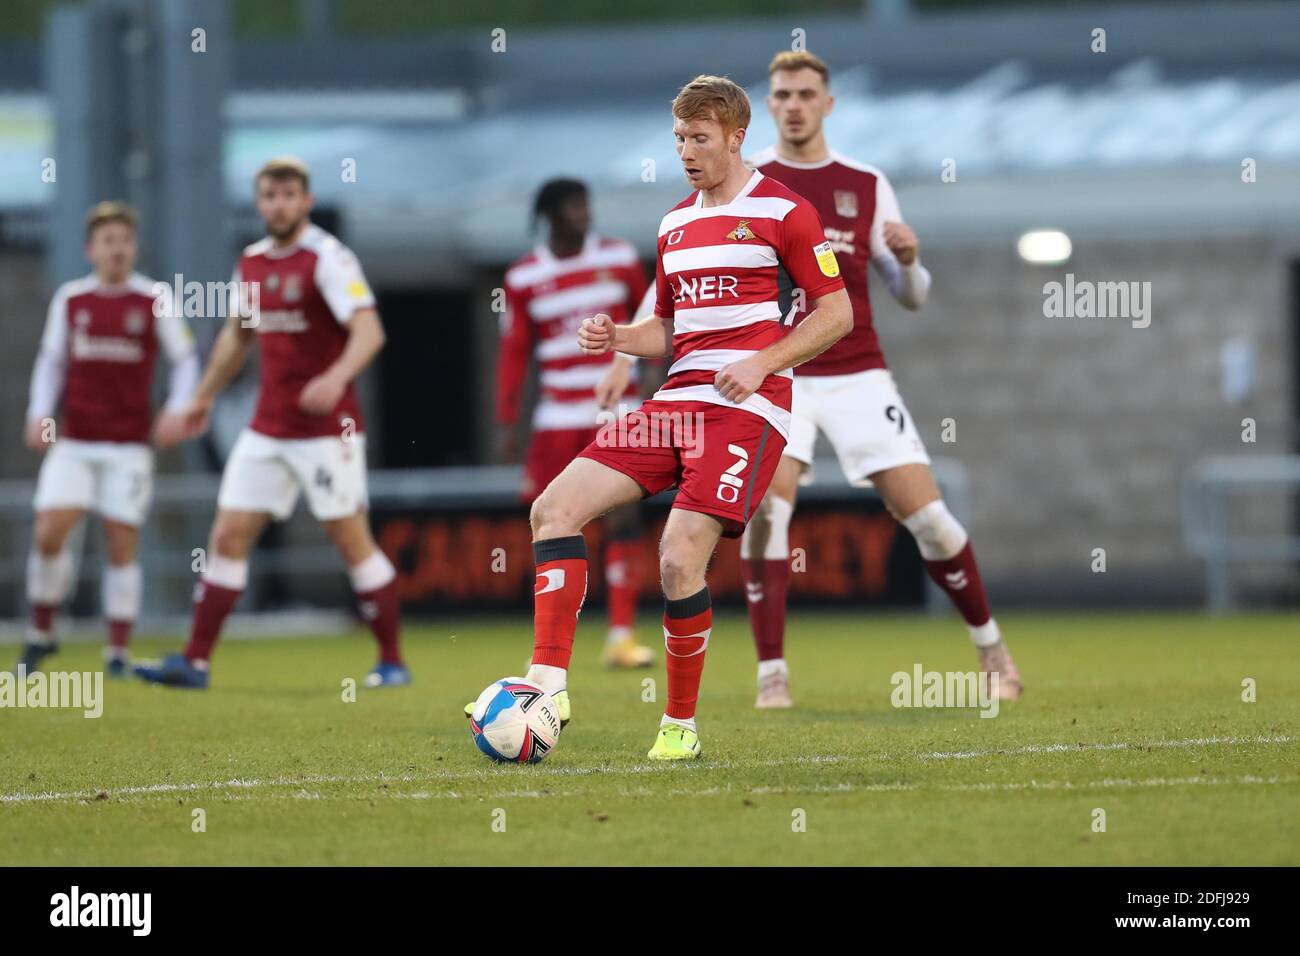 NORTHAMPTON, ENGLAND. SATURDAY 5TH DECEMBER Doncaster Rovers Brad Halliday during the first half of the Sky Bet League One match between Northampton Town and Doncaster Rovers at the PTS Academy Stadium, Northampton on Saturday 5th December 2020. (Credit: John Cripps | MI News) Credit: MI News & Sport /Alamy Live News Stock Photo